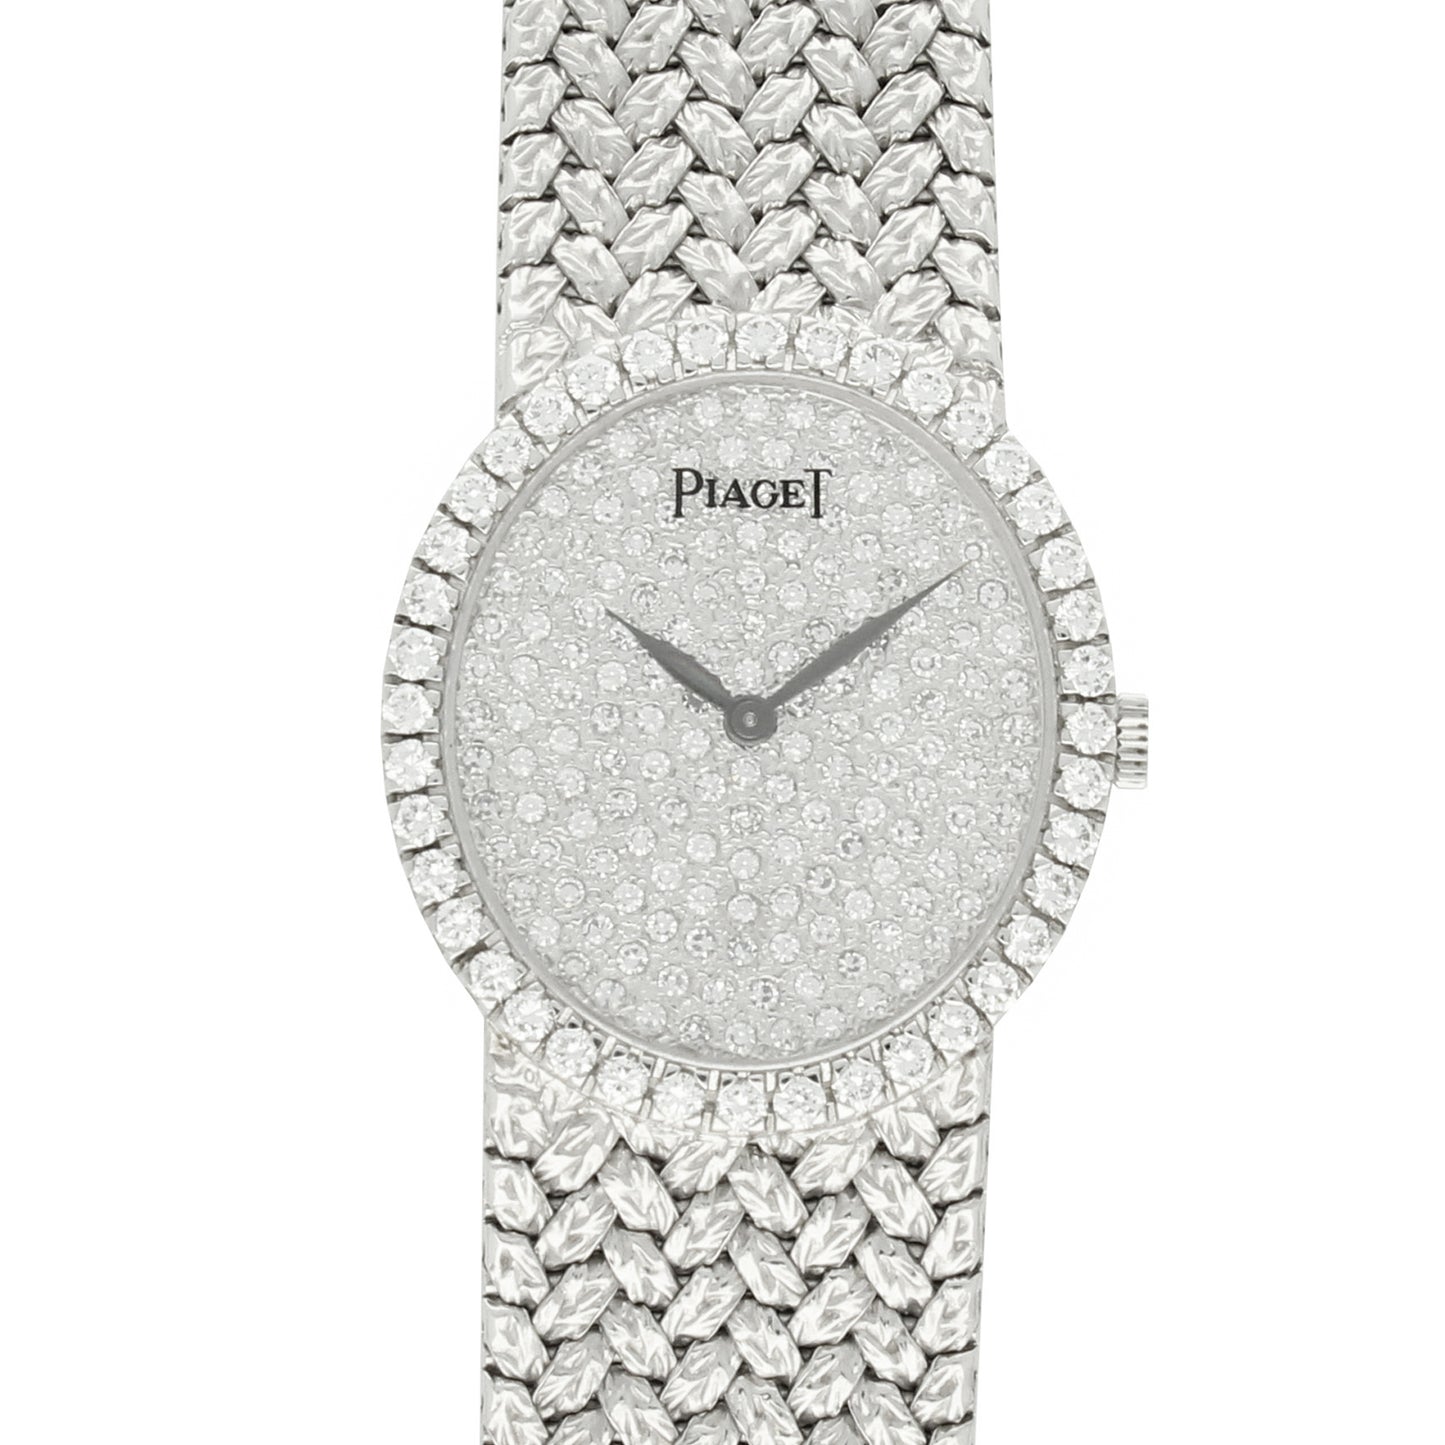 18ct white gold oval bracelet watch with diamond set dial and bezel. Made 1970s